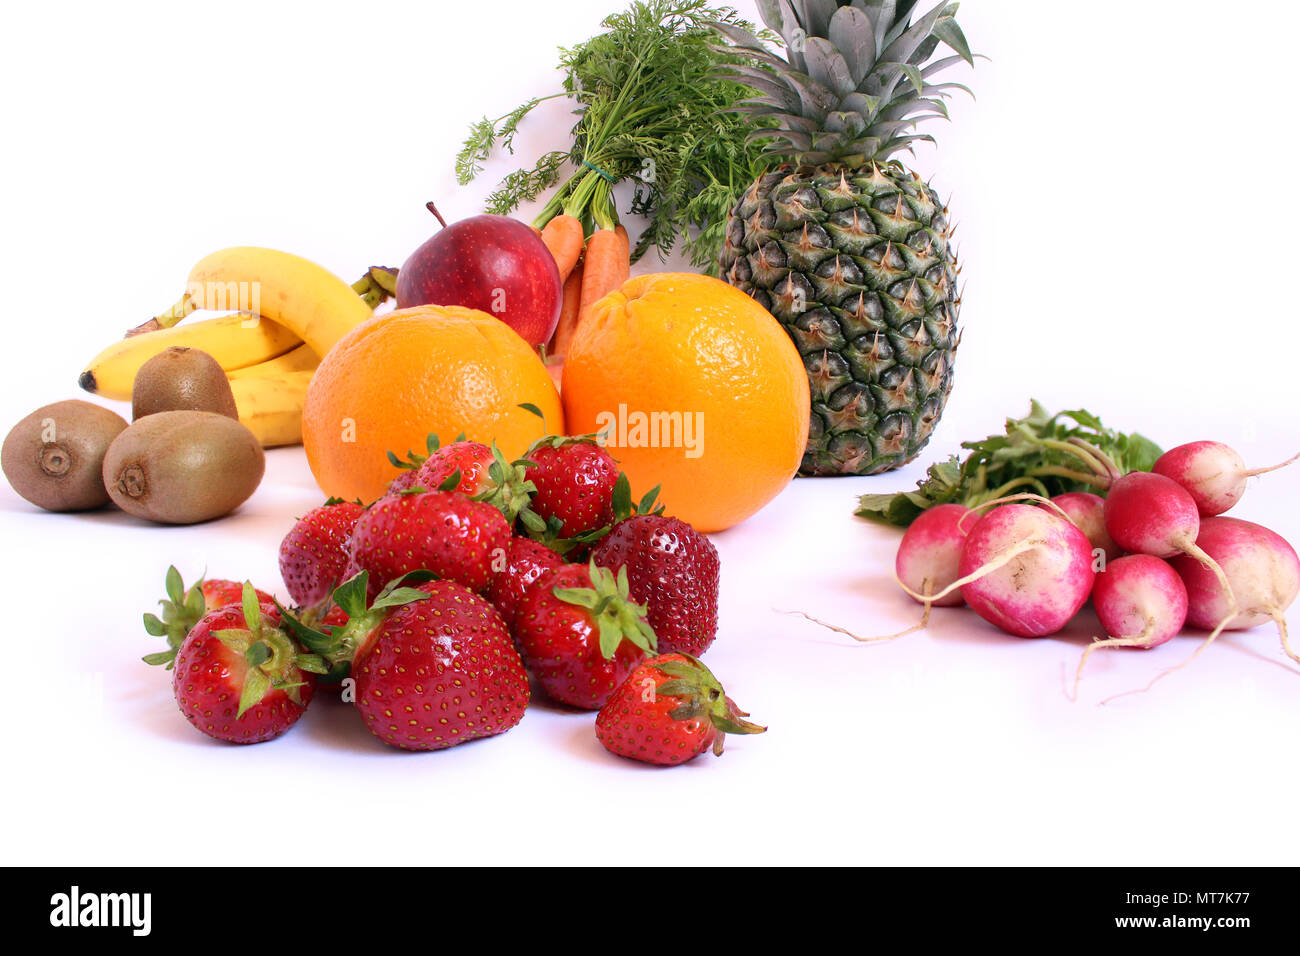 exotic fruits and vegetables list